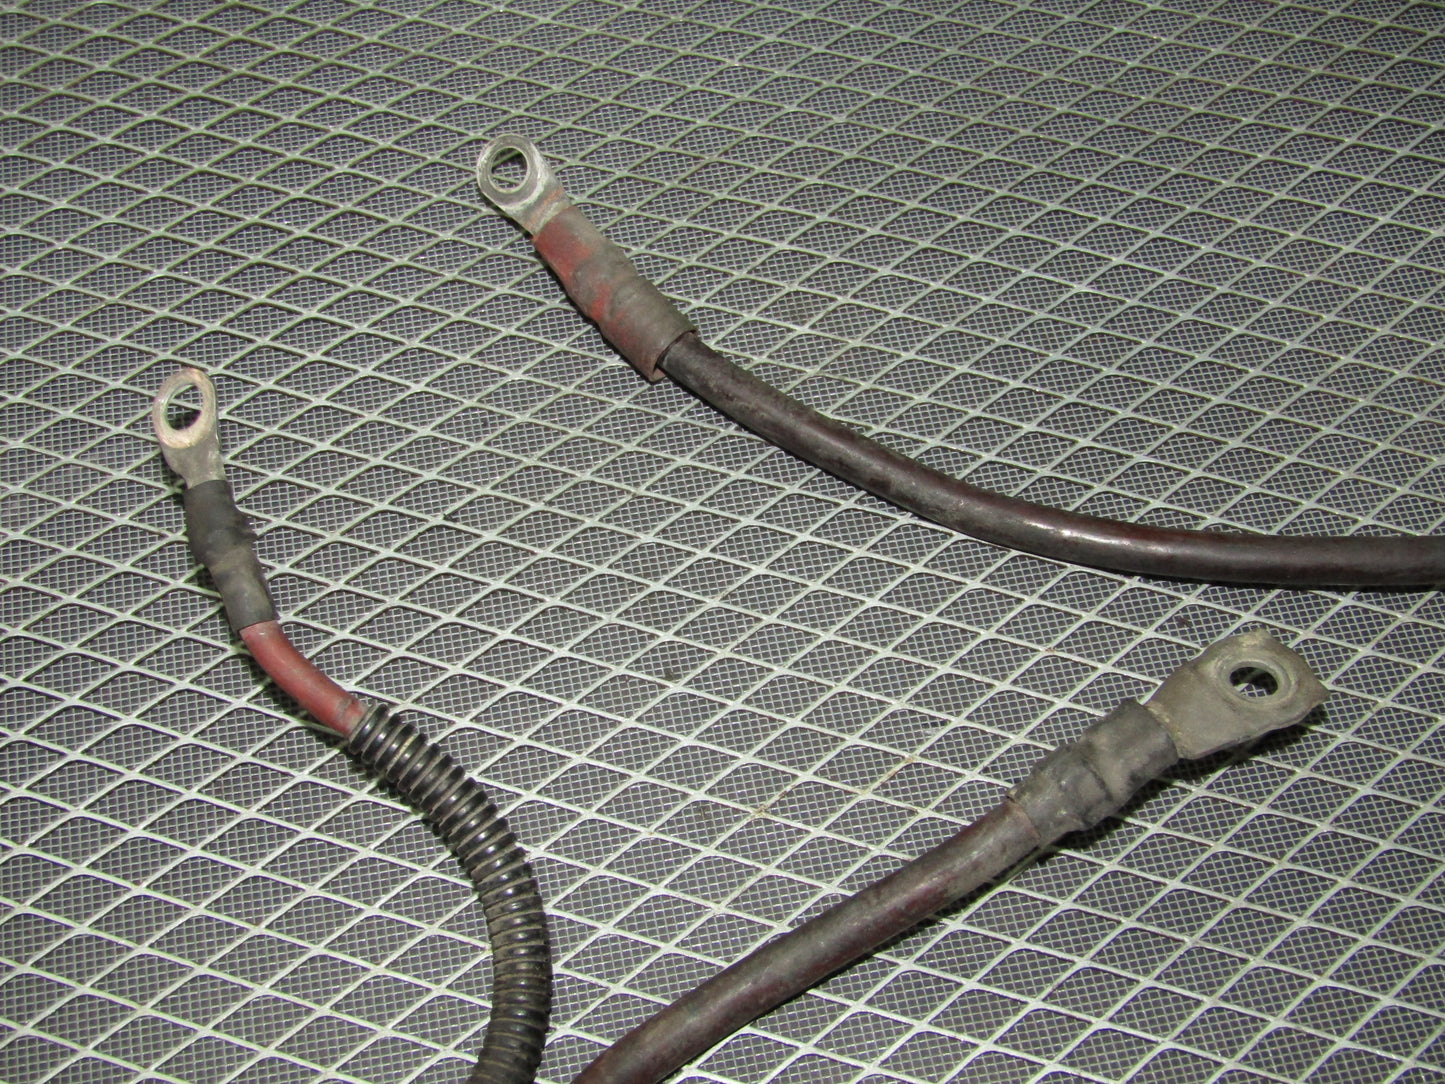 92 93 94 95 BMW 325 OEM Starter Cable